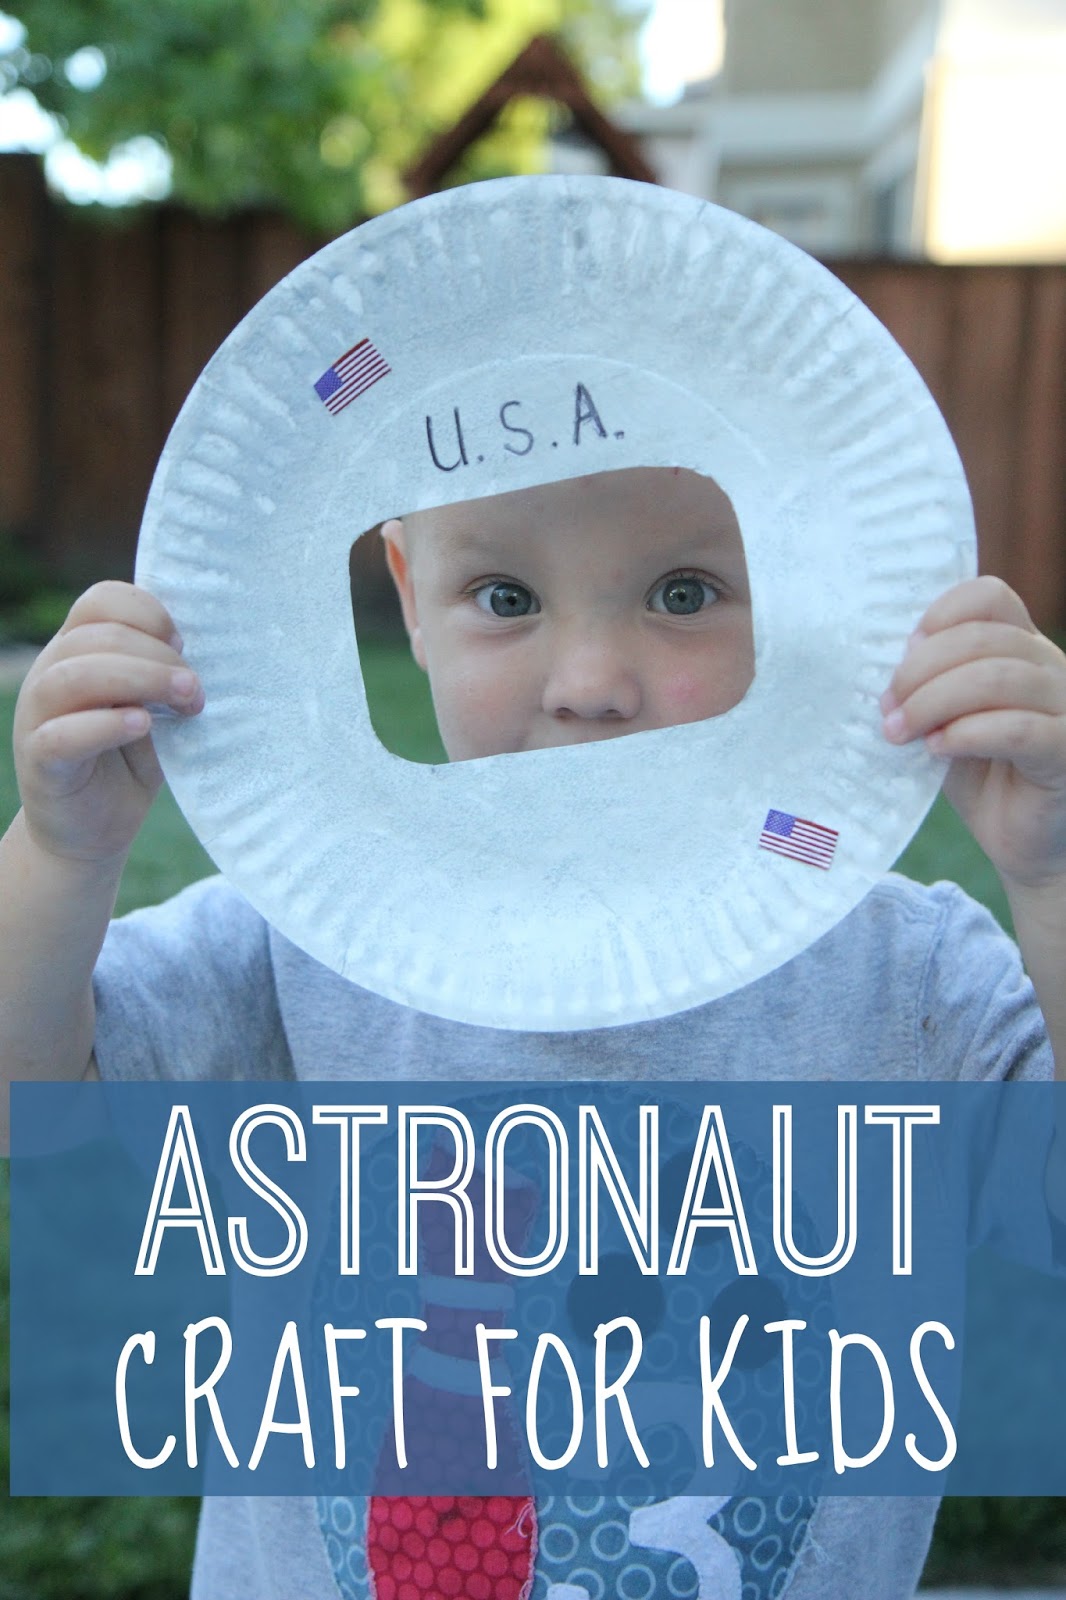 Toddler Approved!: Astronaut Photo Craft for Kids